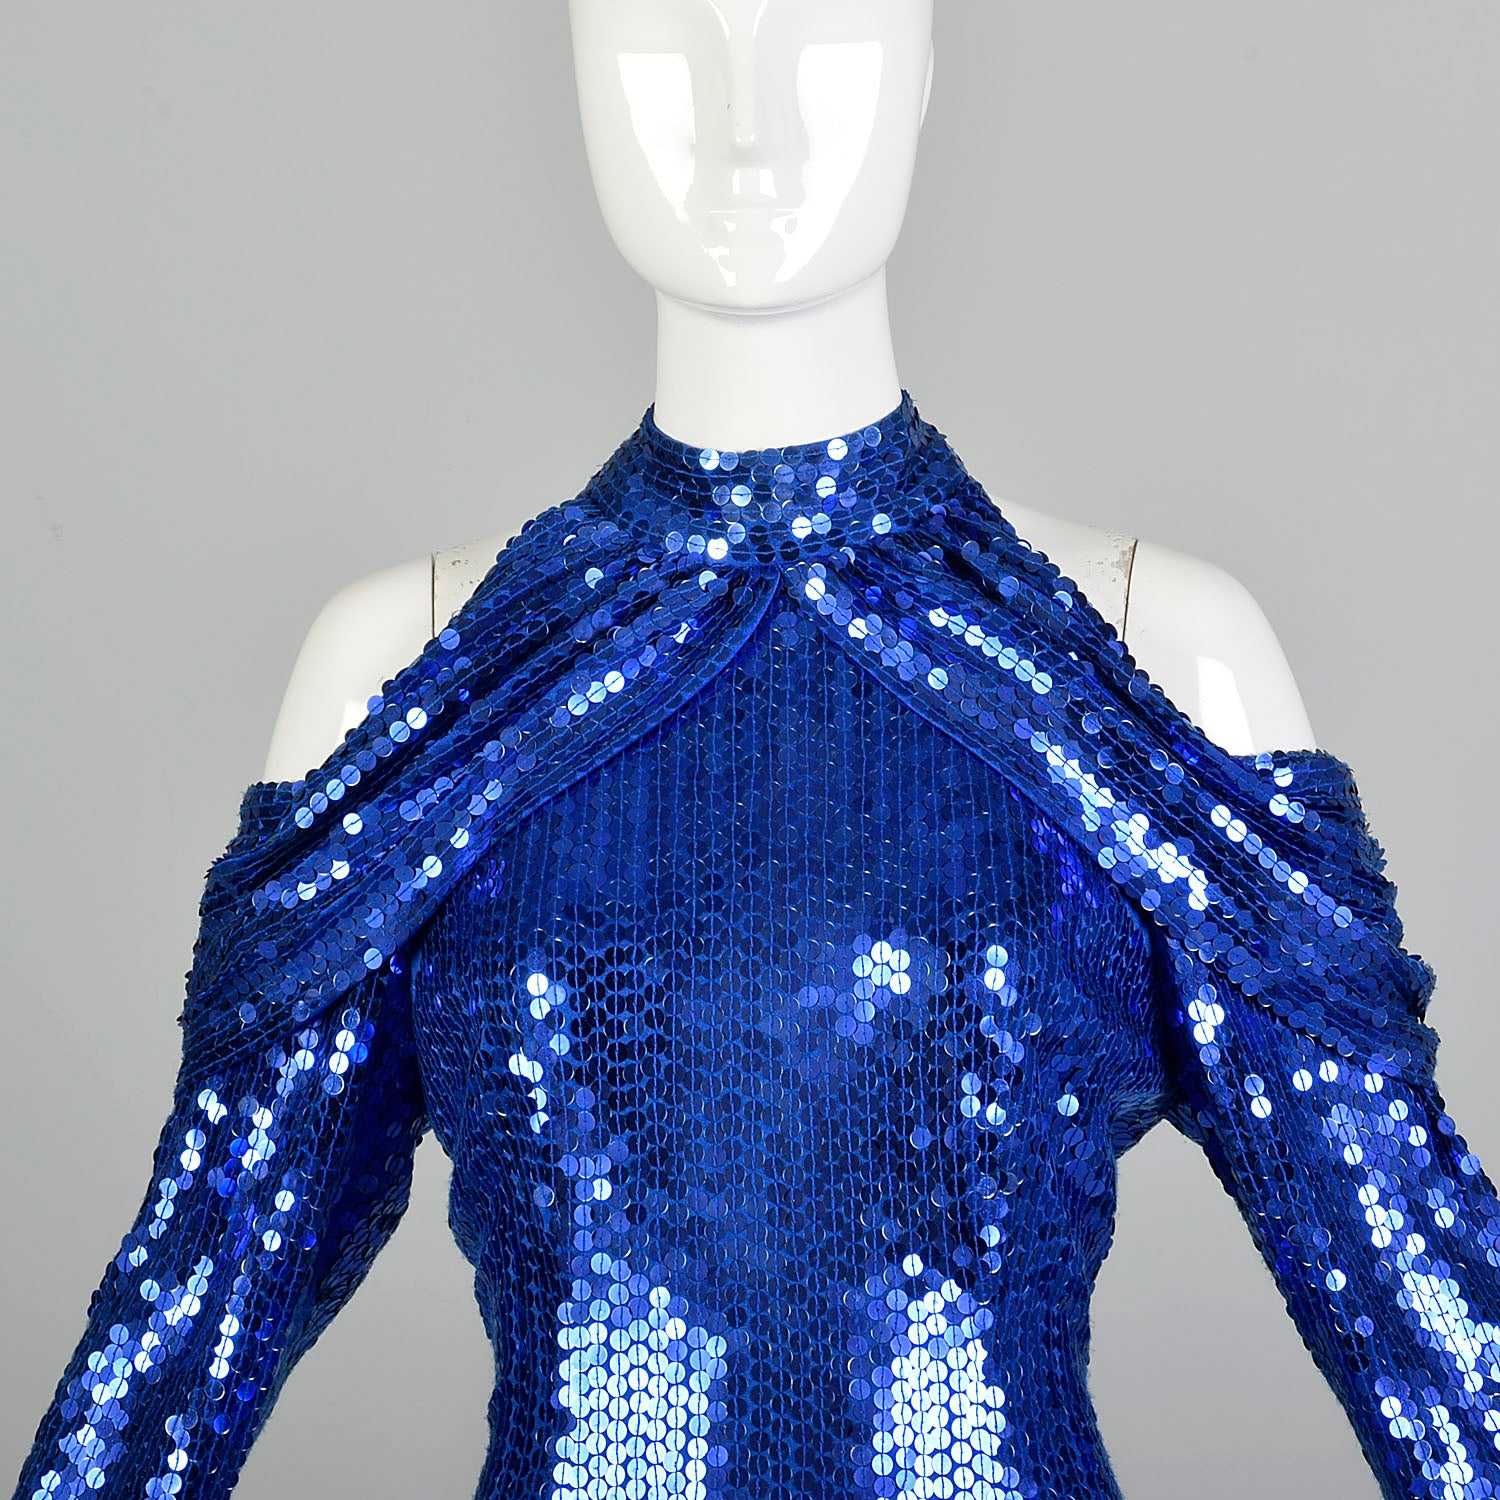 Small 1990s Blue Sequin Body Con Party Dress Long Sleeve Mini Dress Cold Shoulder Dress